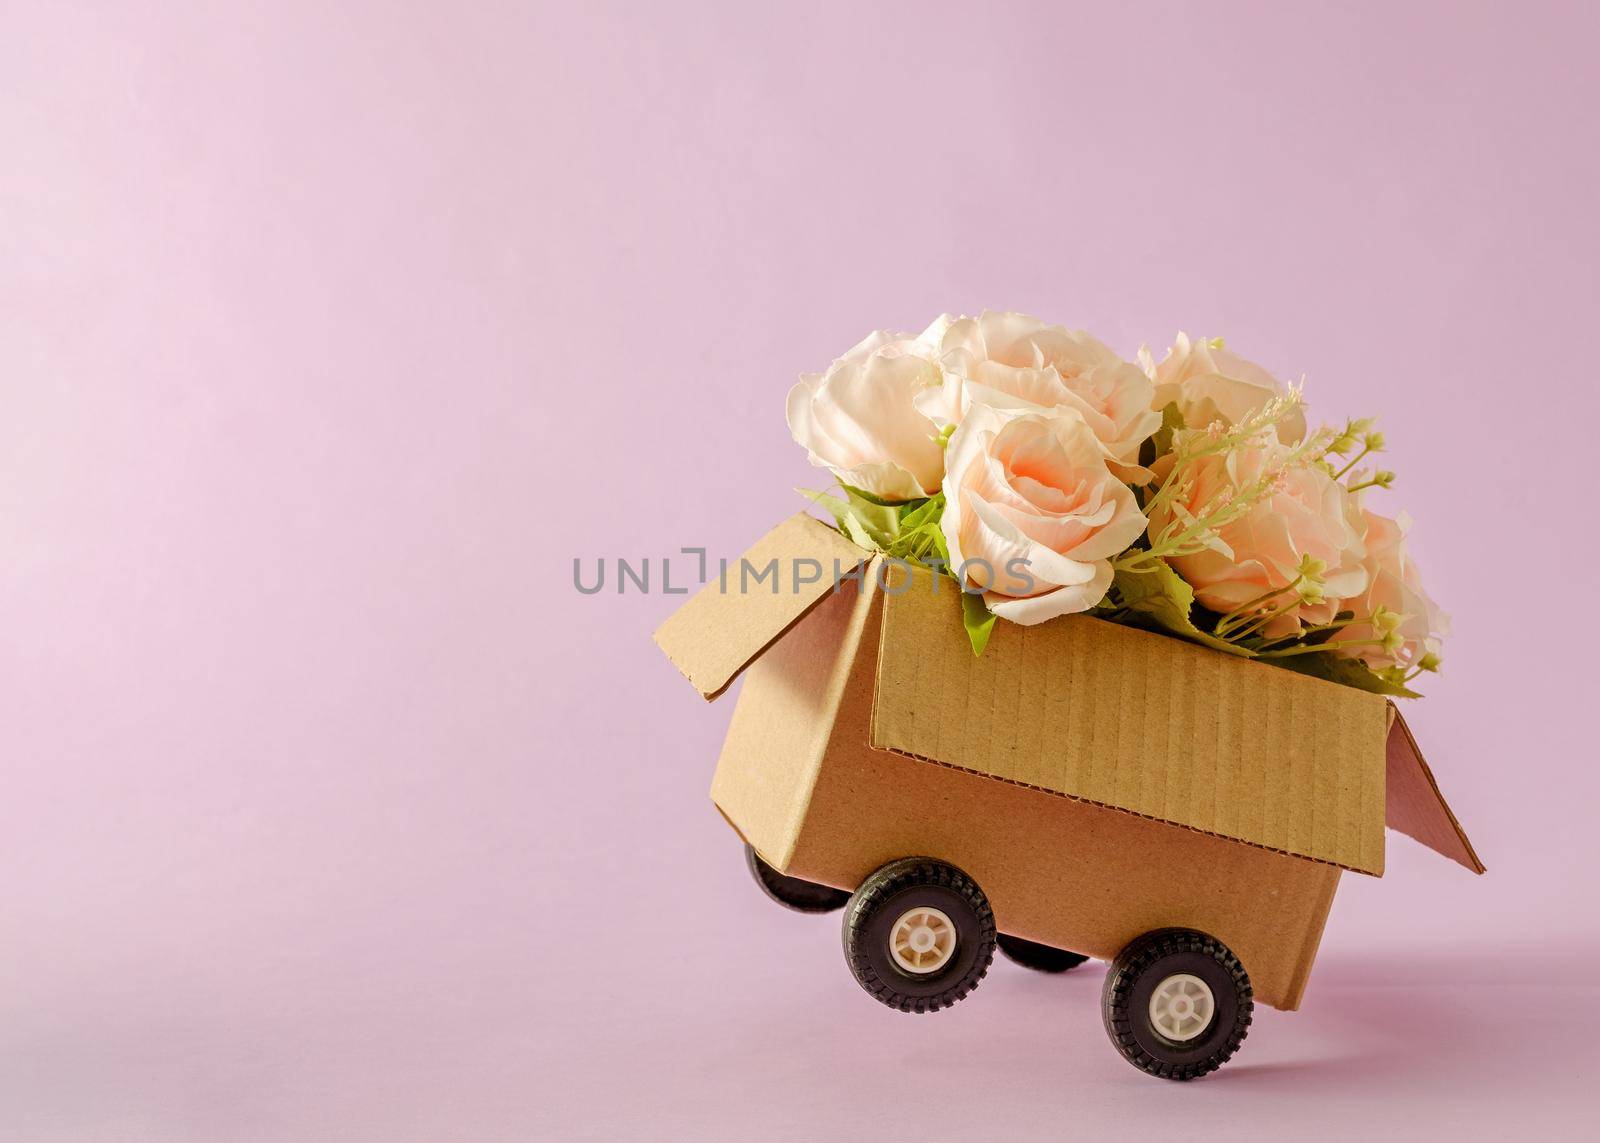 Cardboard box delivery container with truck wheels and bouquet of pink roses.  by sergii_gnatiuk